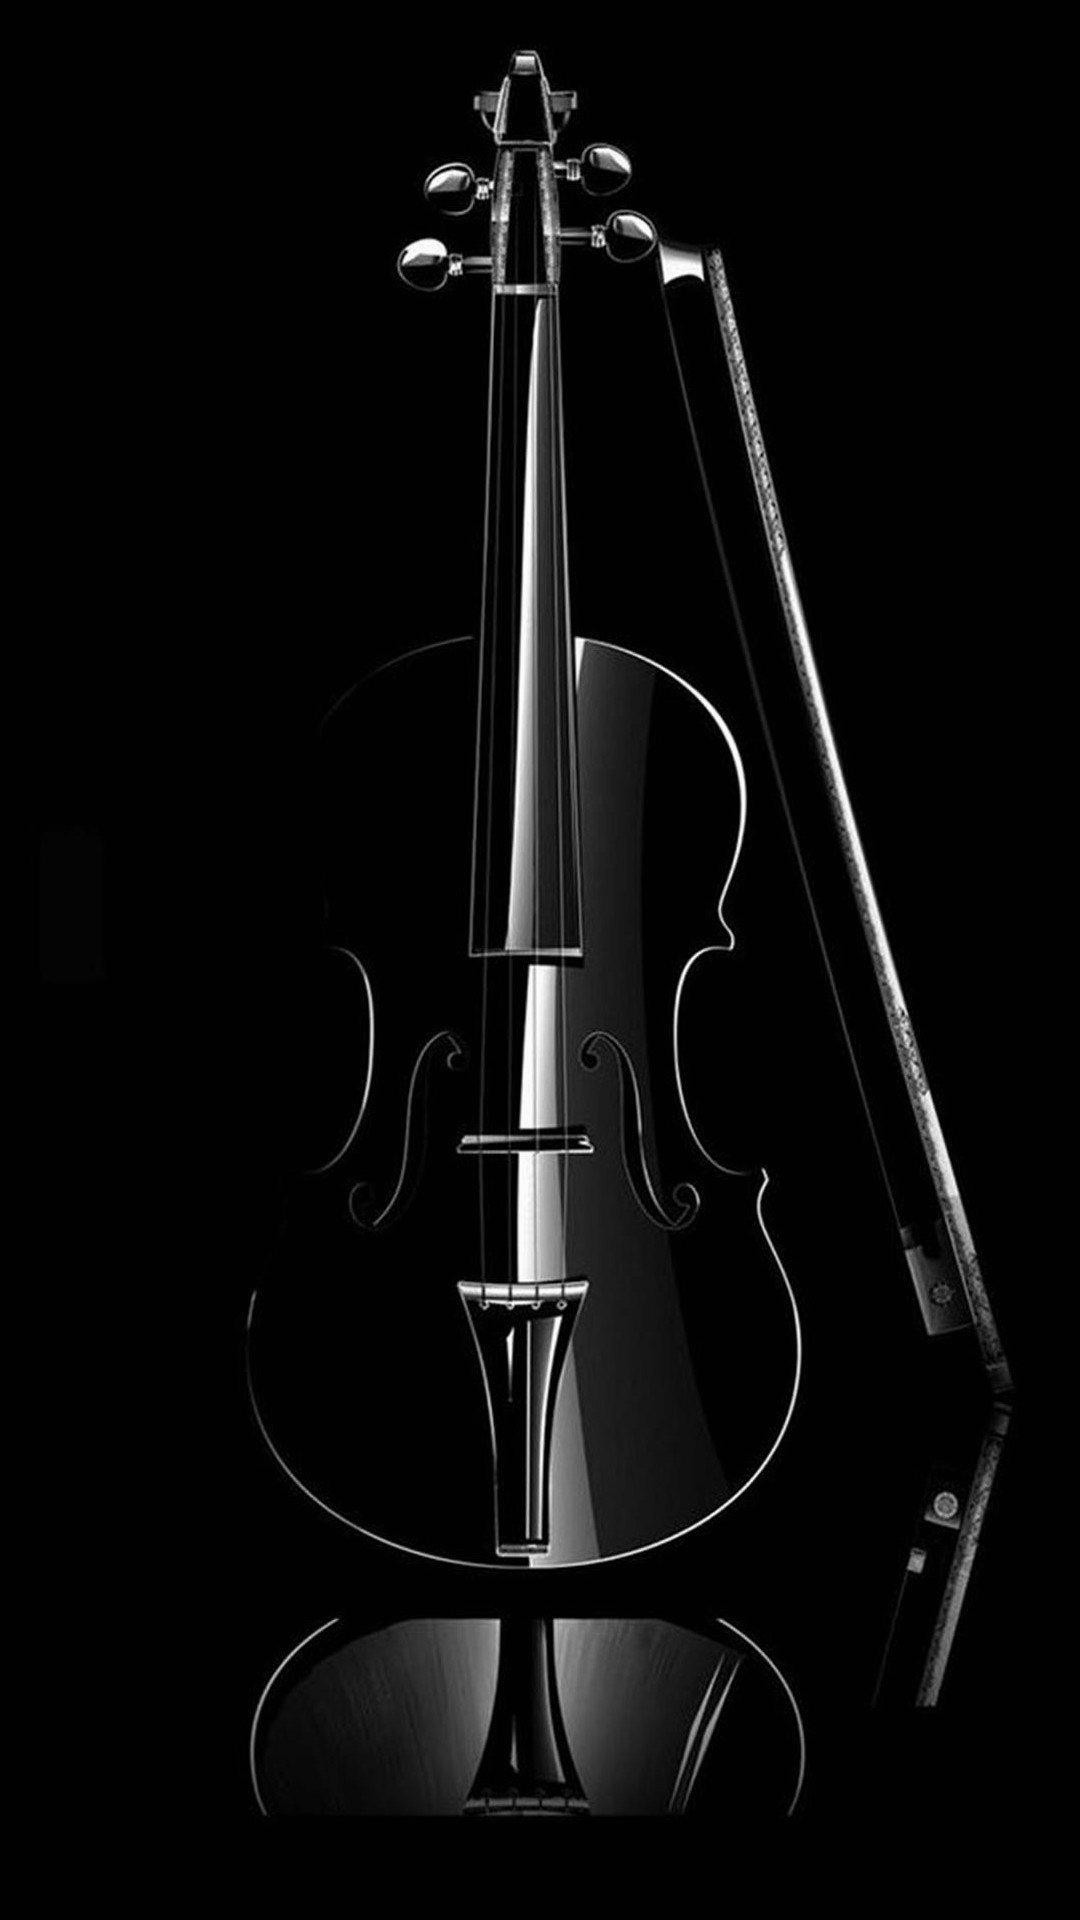 Best Wallpaper For Android Music Smartphone Classical - Hd Black Samsung S8 - HD Wallpaper 